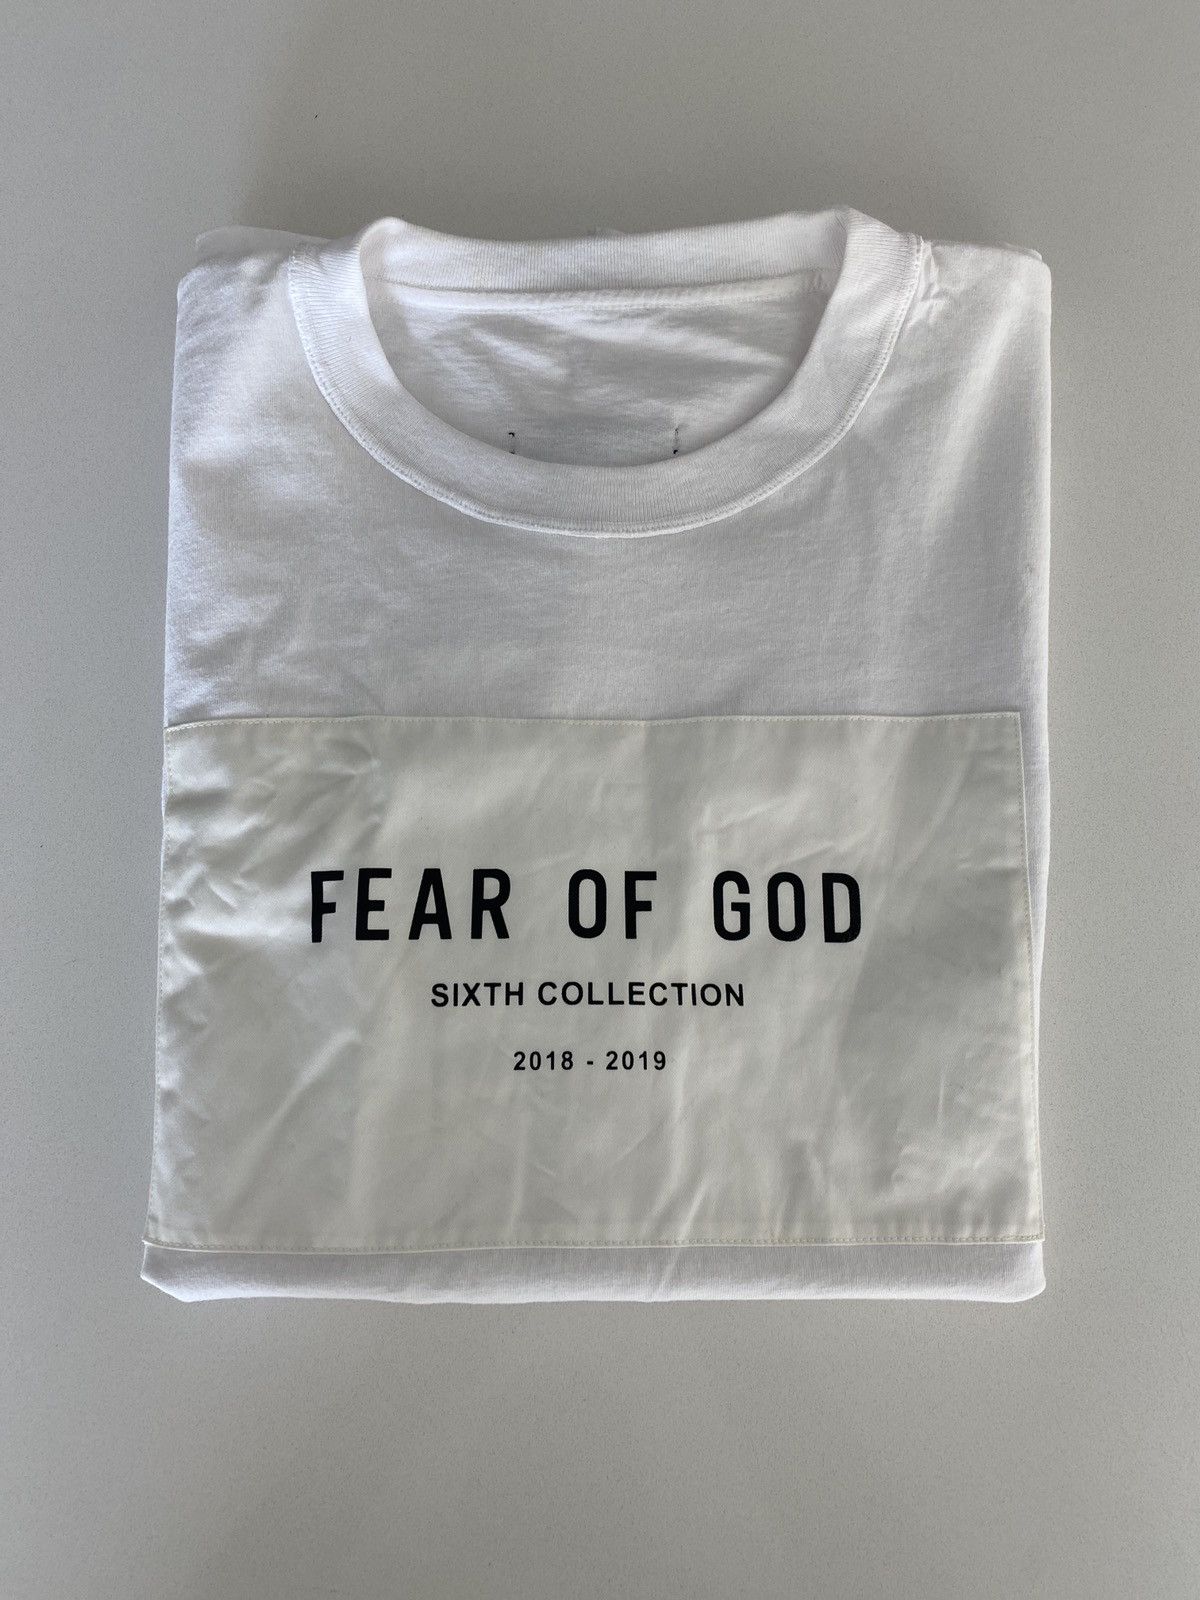 Fear of God sixh collection 2018-2019